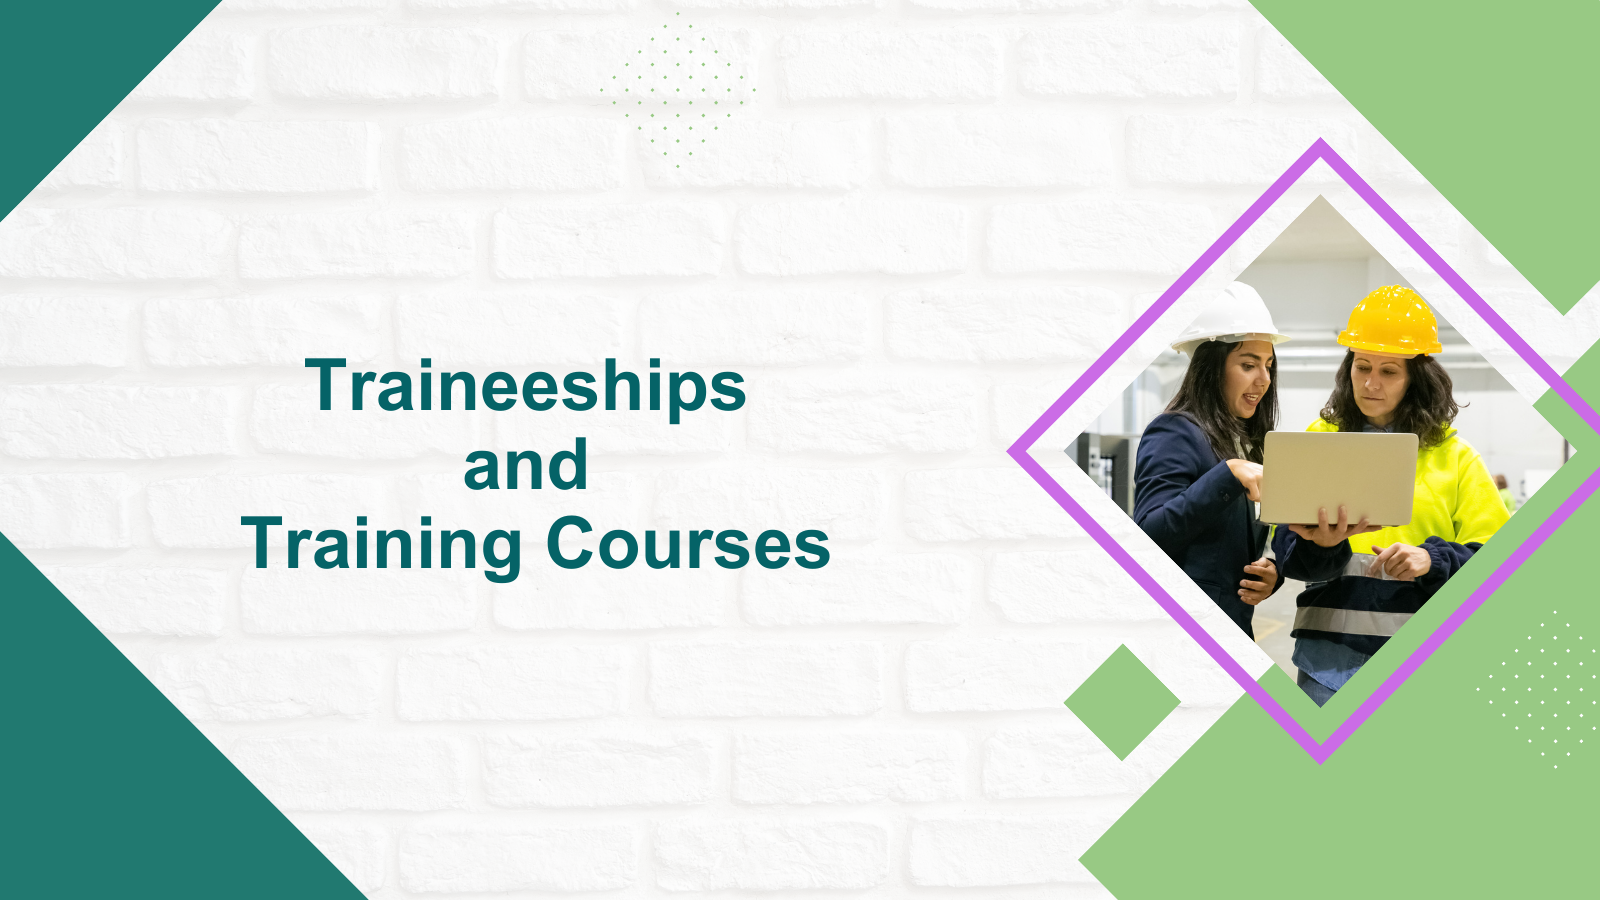 Traineeships and Training Courses